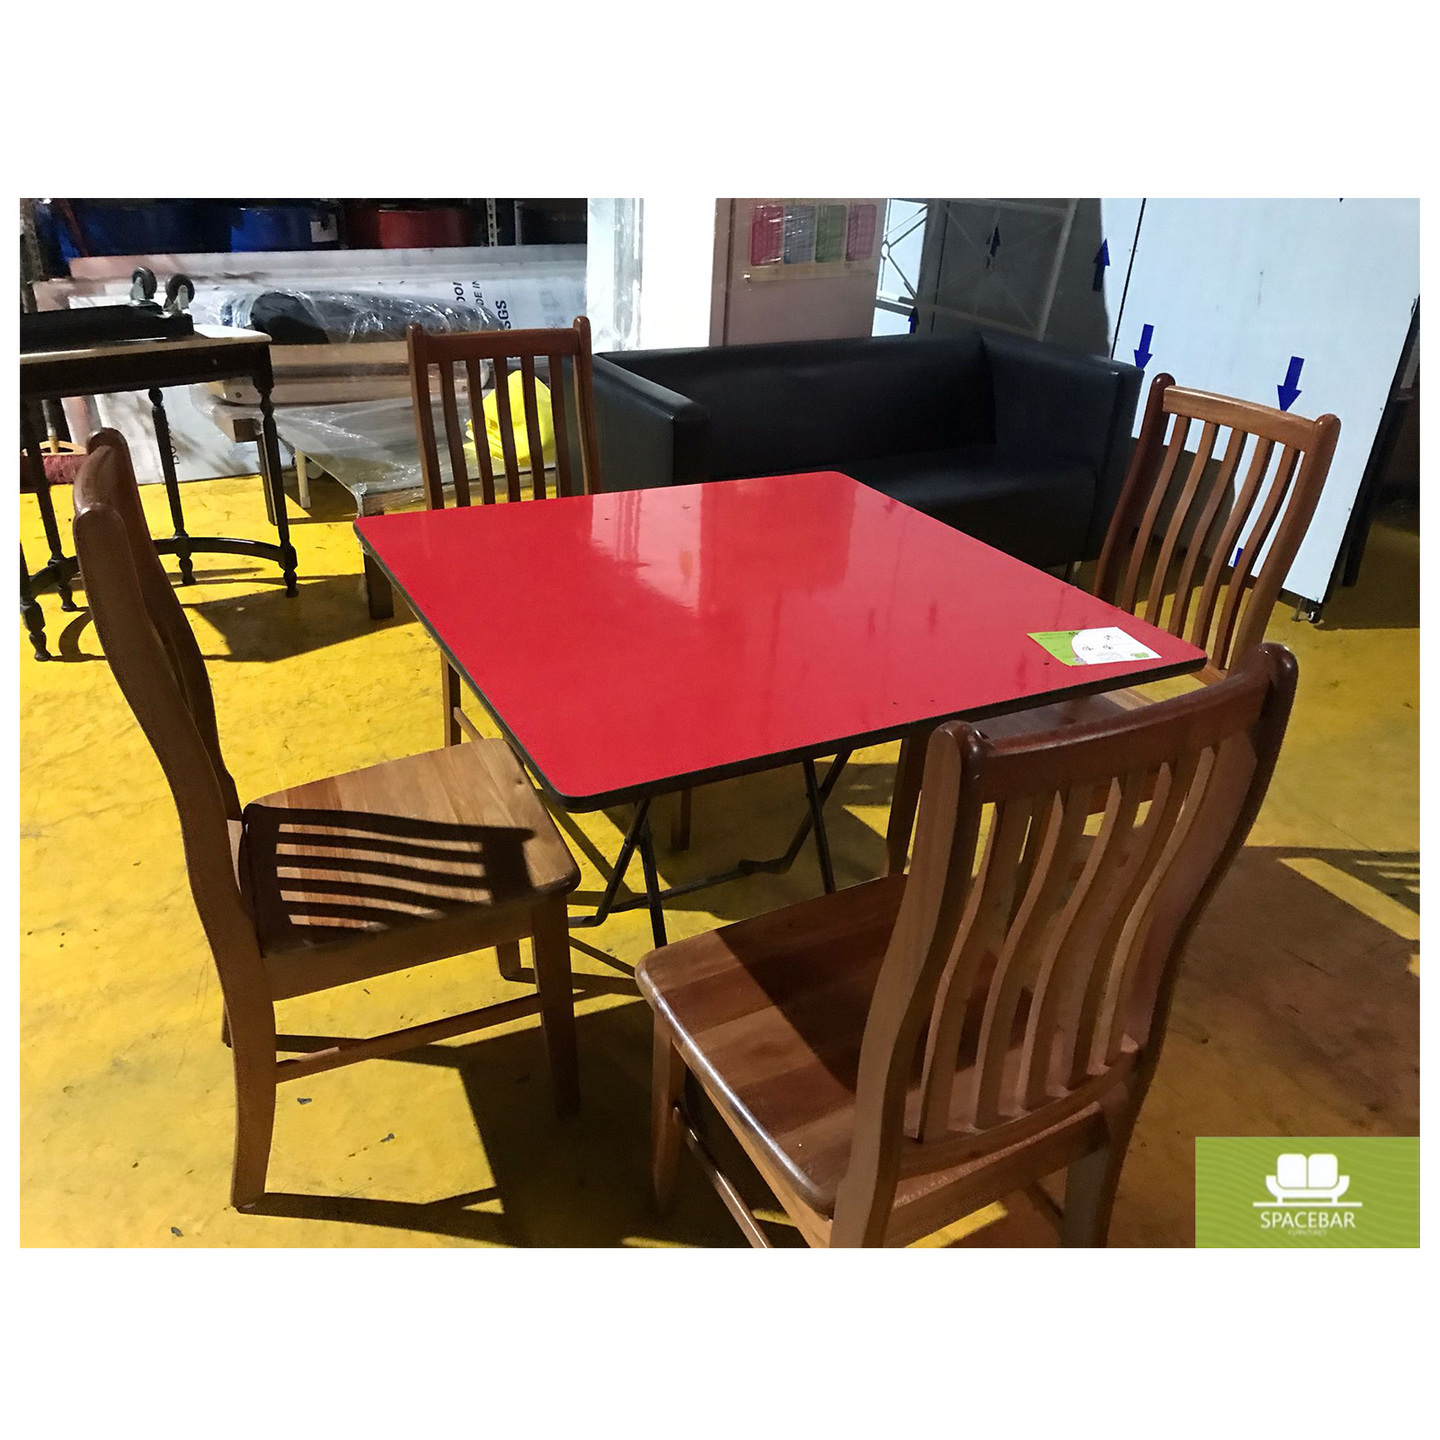 Vibrant Red Table Set